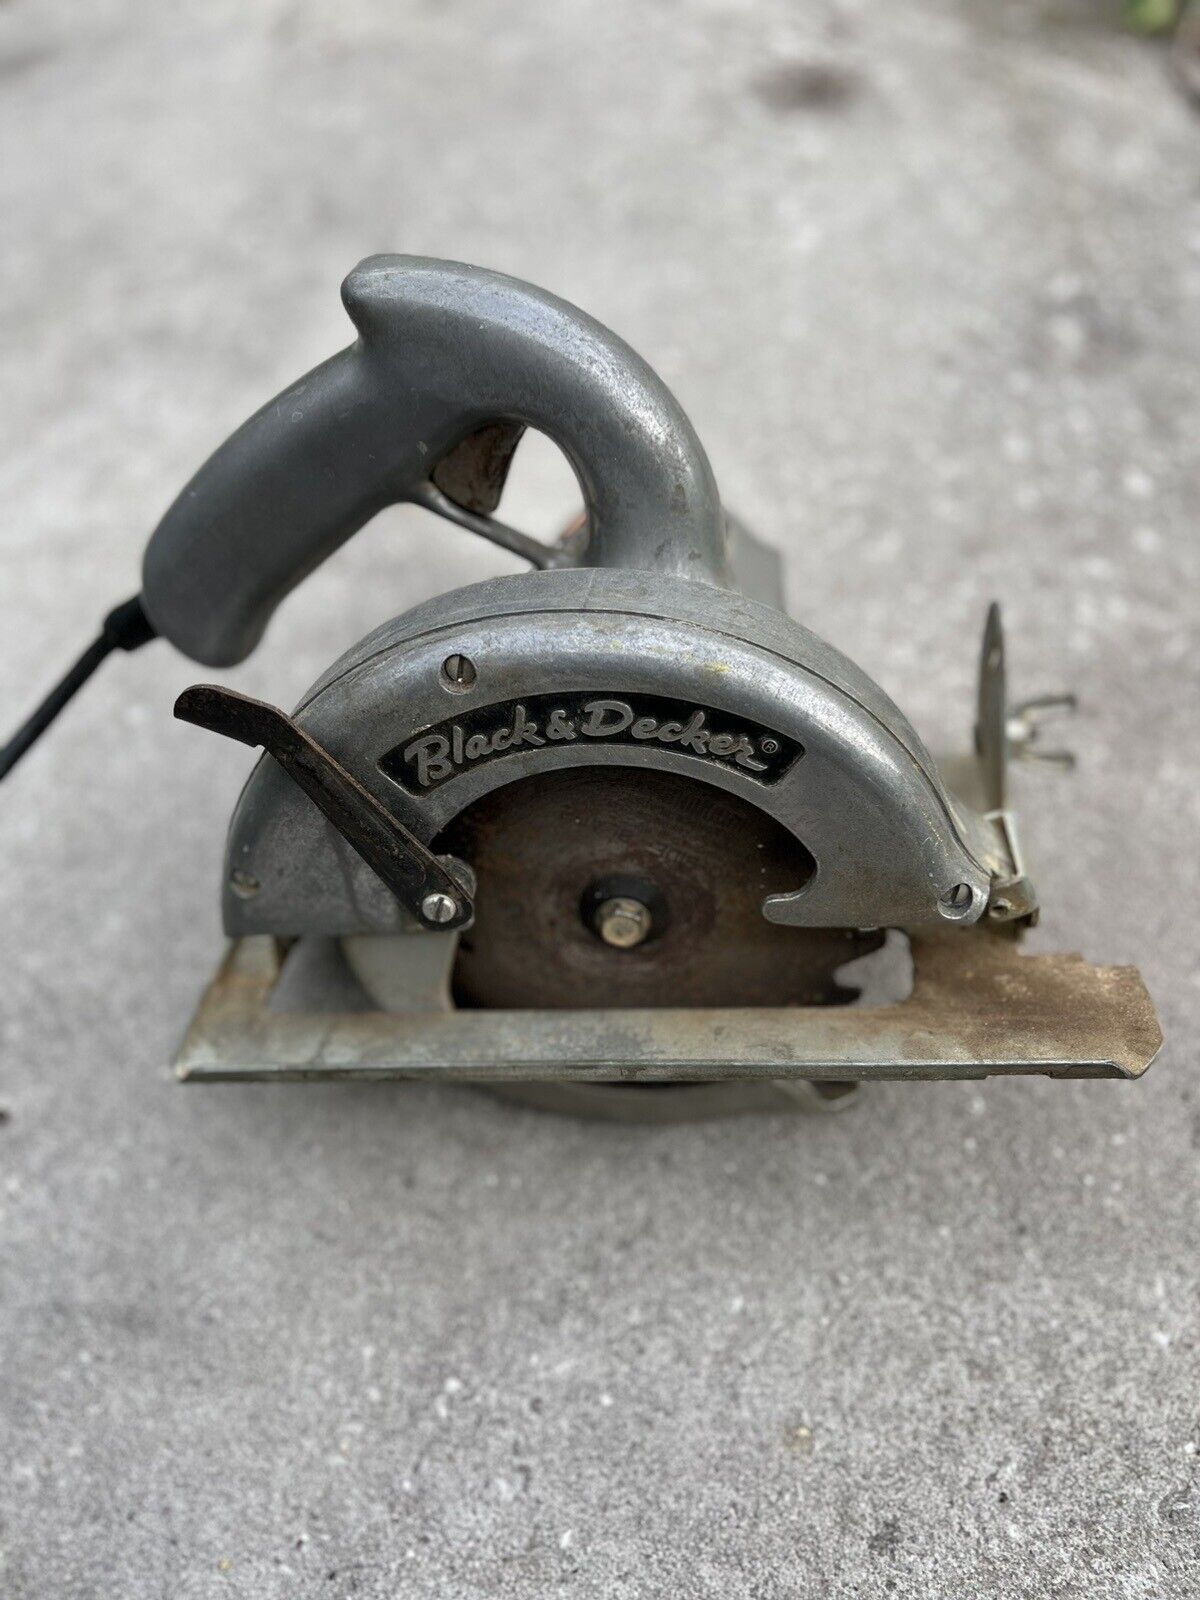 VINTAGE BLACK & DECKER 6-1/2” HEAVY DUTY PORTABLE CIRCULAR SAW. Tested And Works